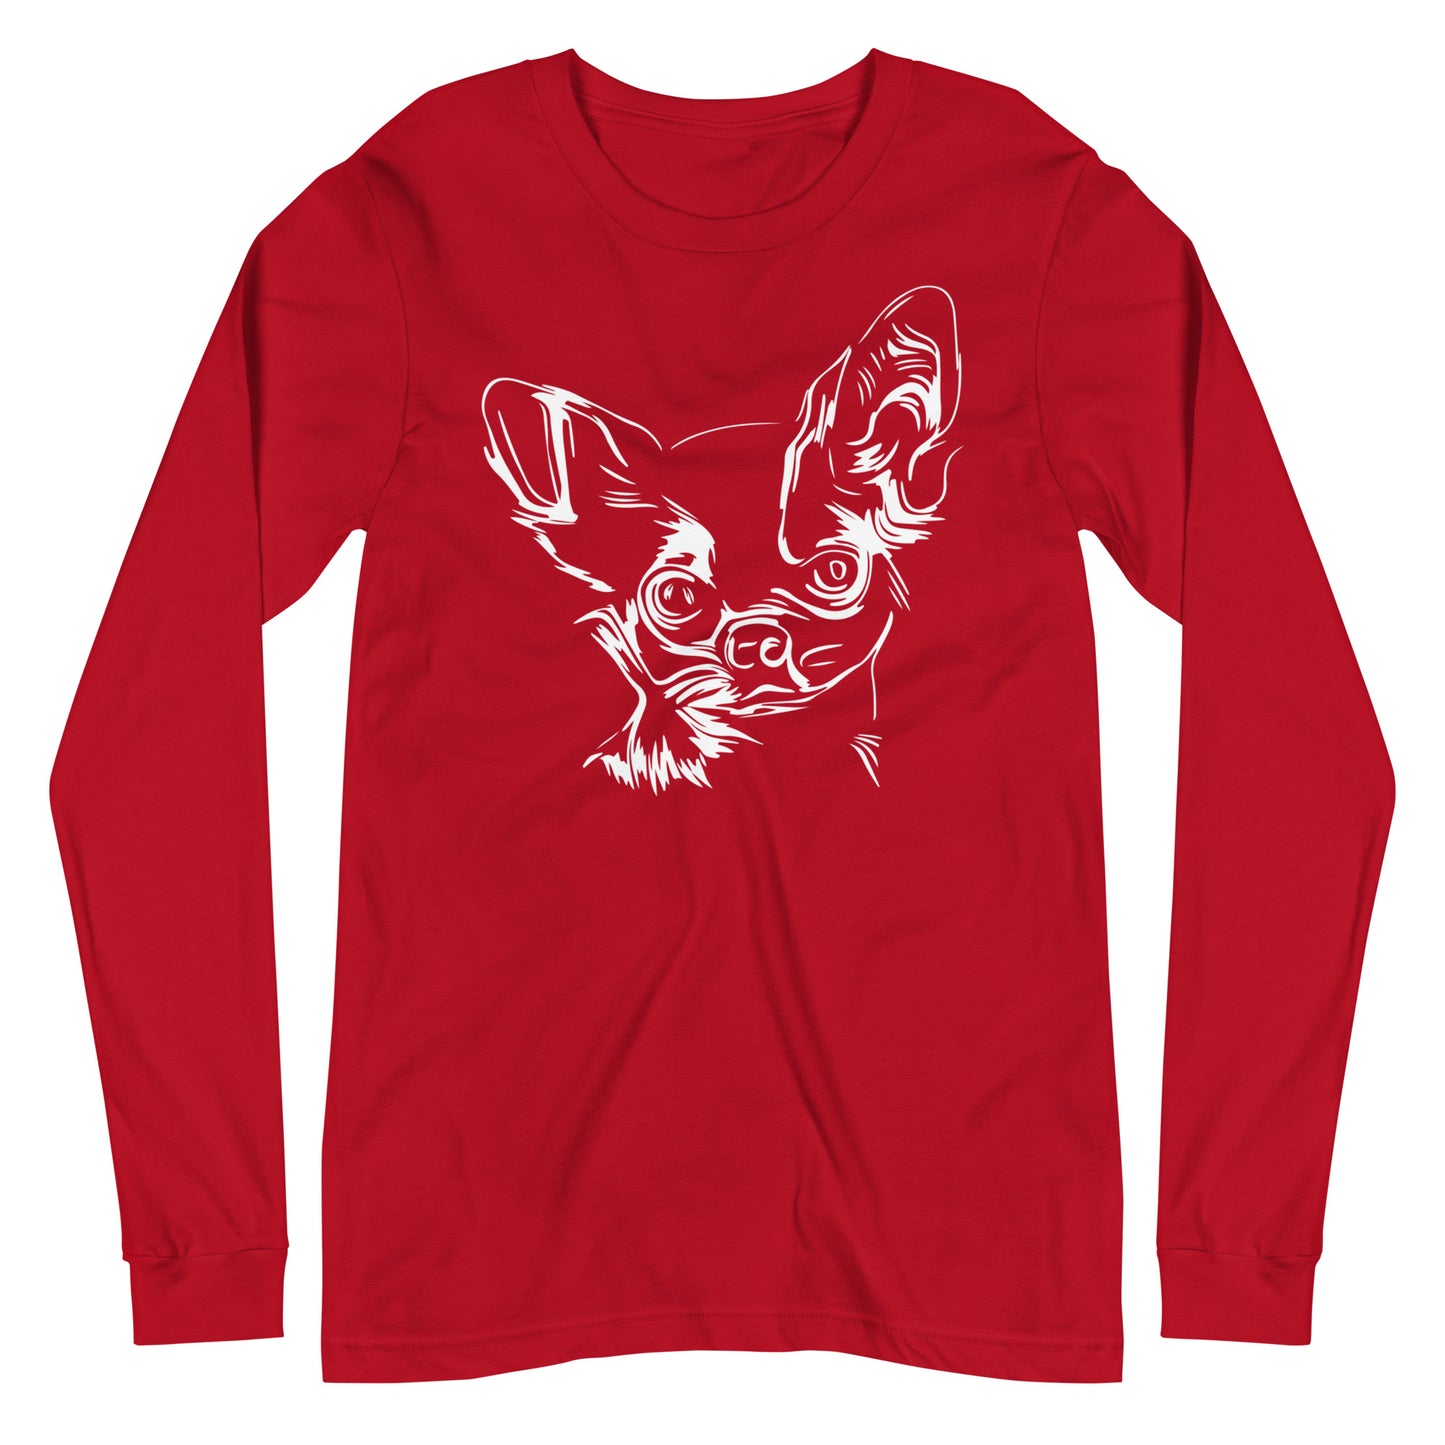 White line Chihuahua face on unisex red long sleeve t-shirt